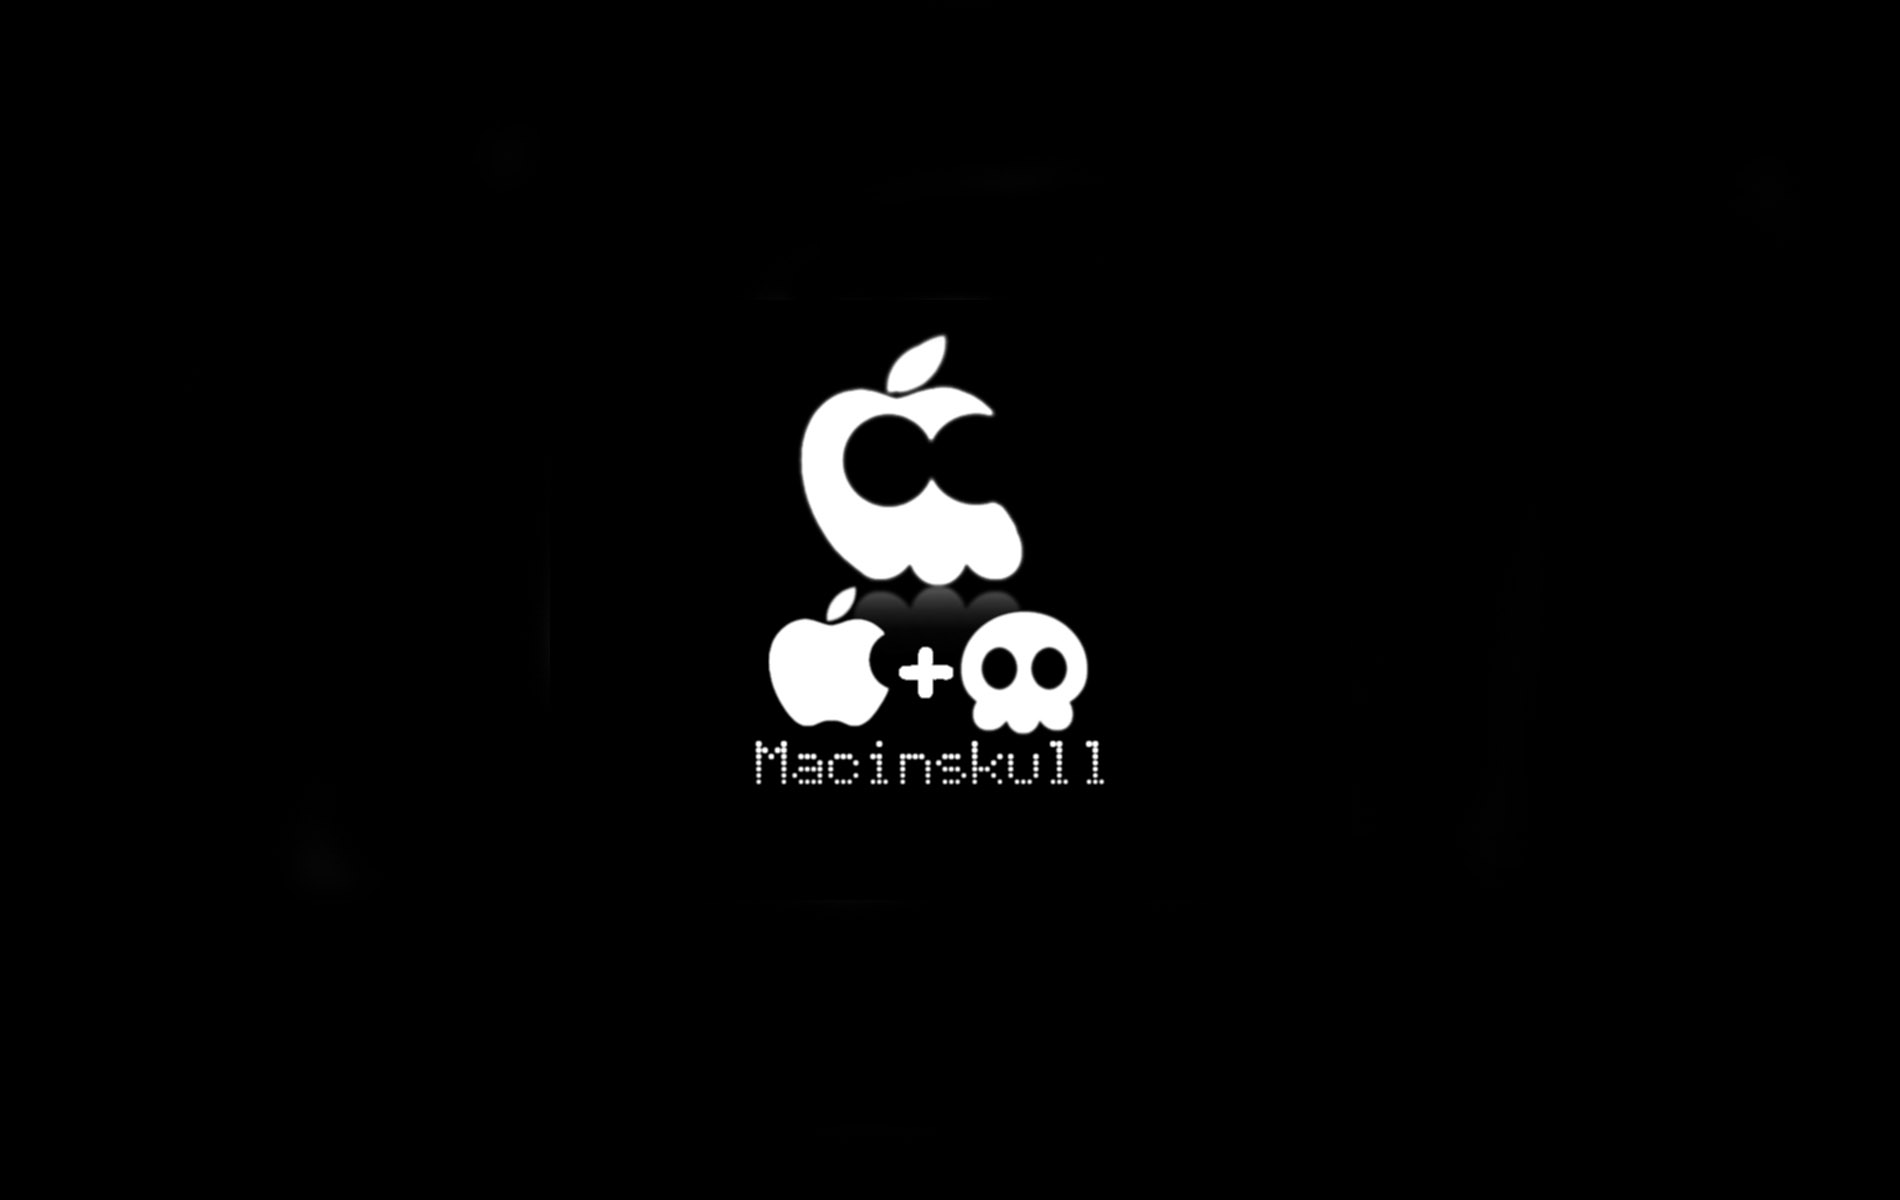 Funny Mac Wallpapers Images amp Pictures   Becuo